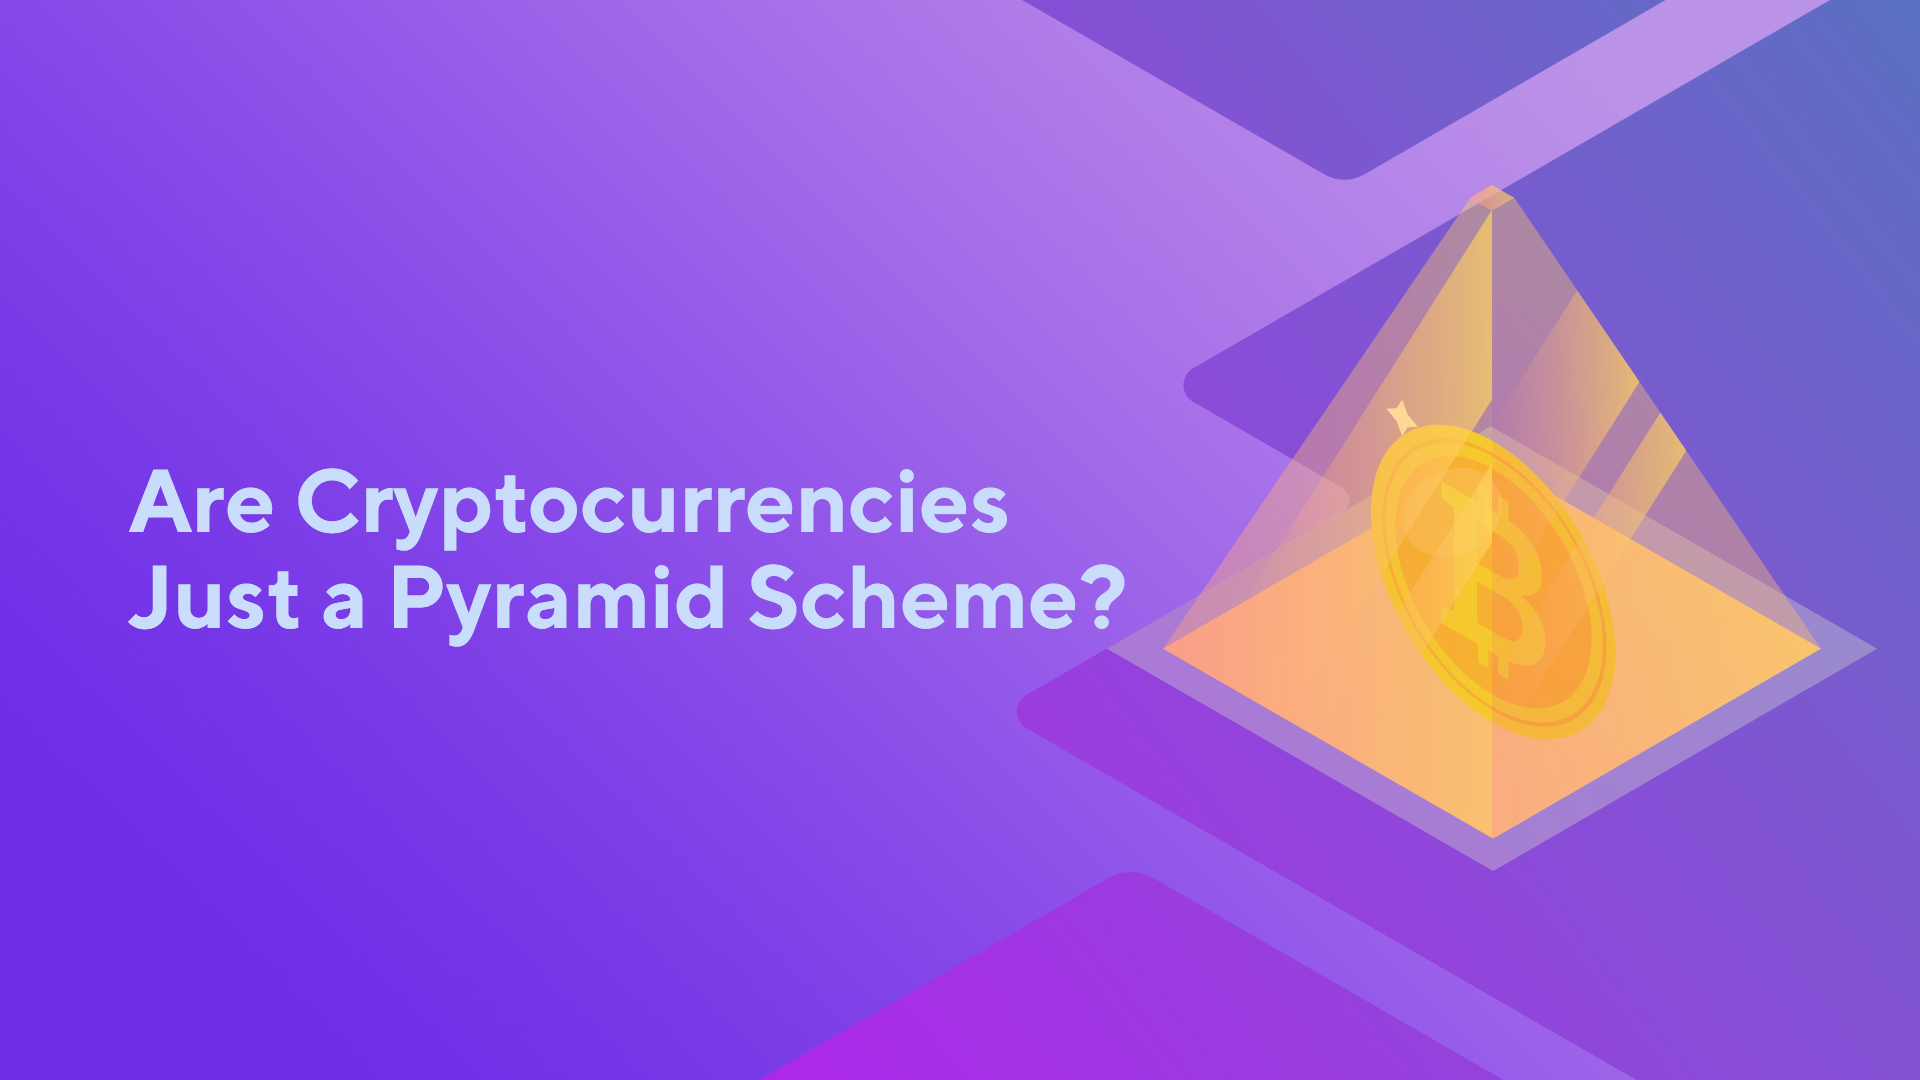 Are Cryptocurrencies Just a Pyramid Scheme?